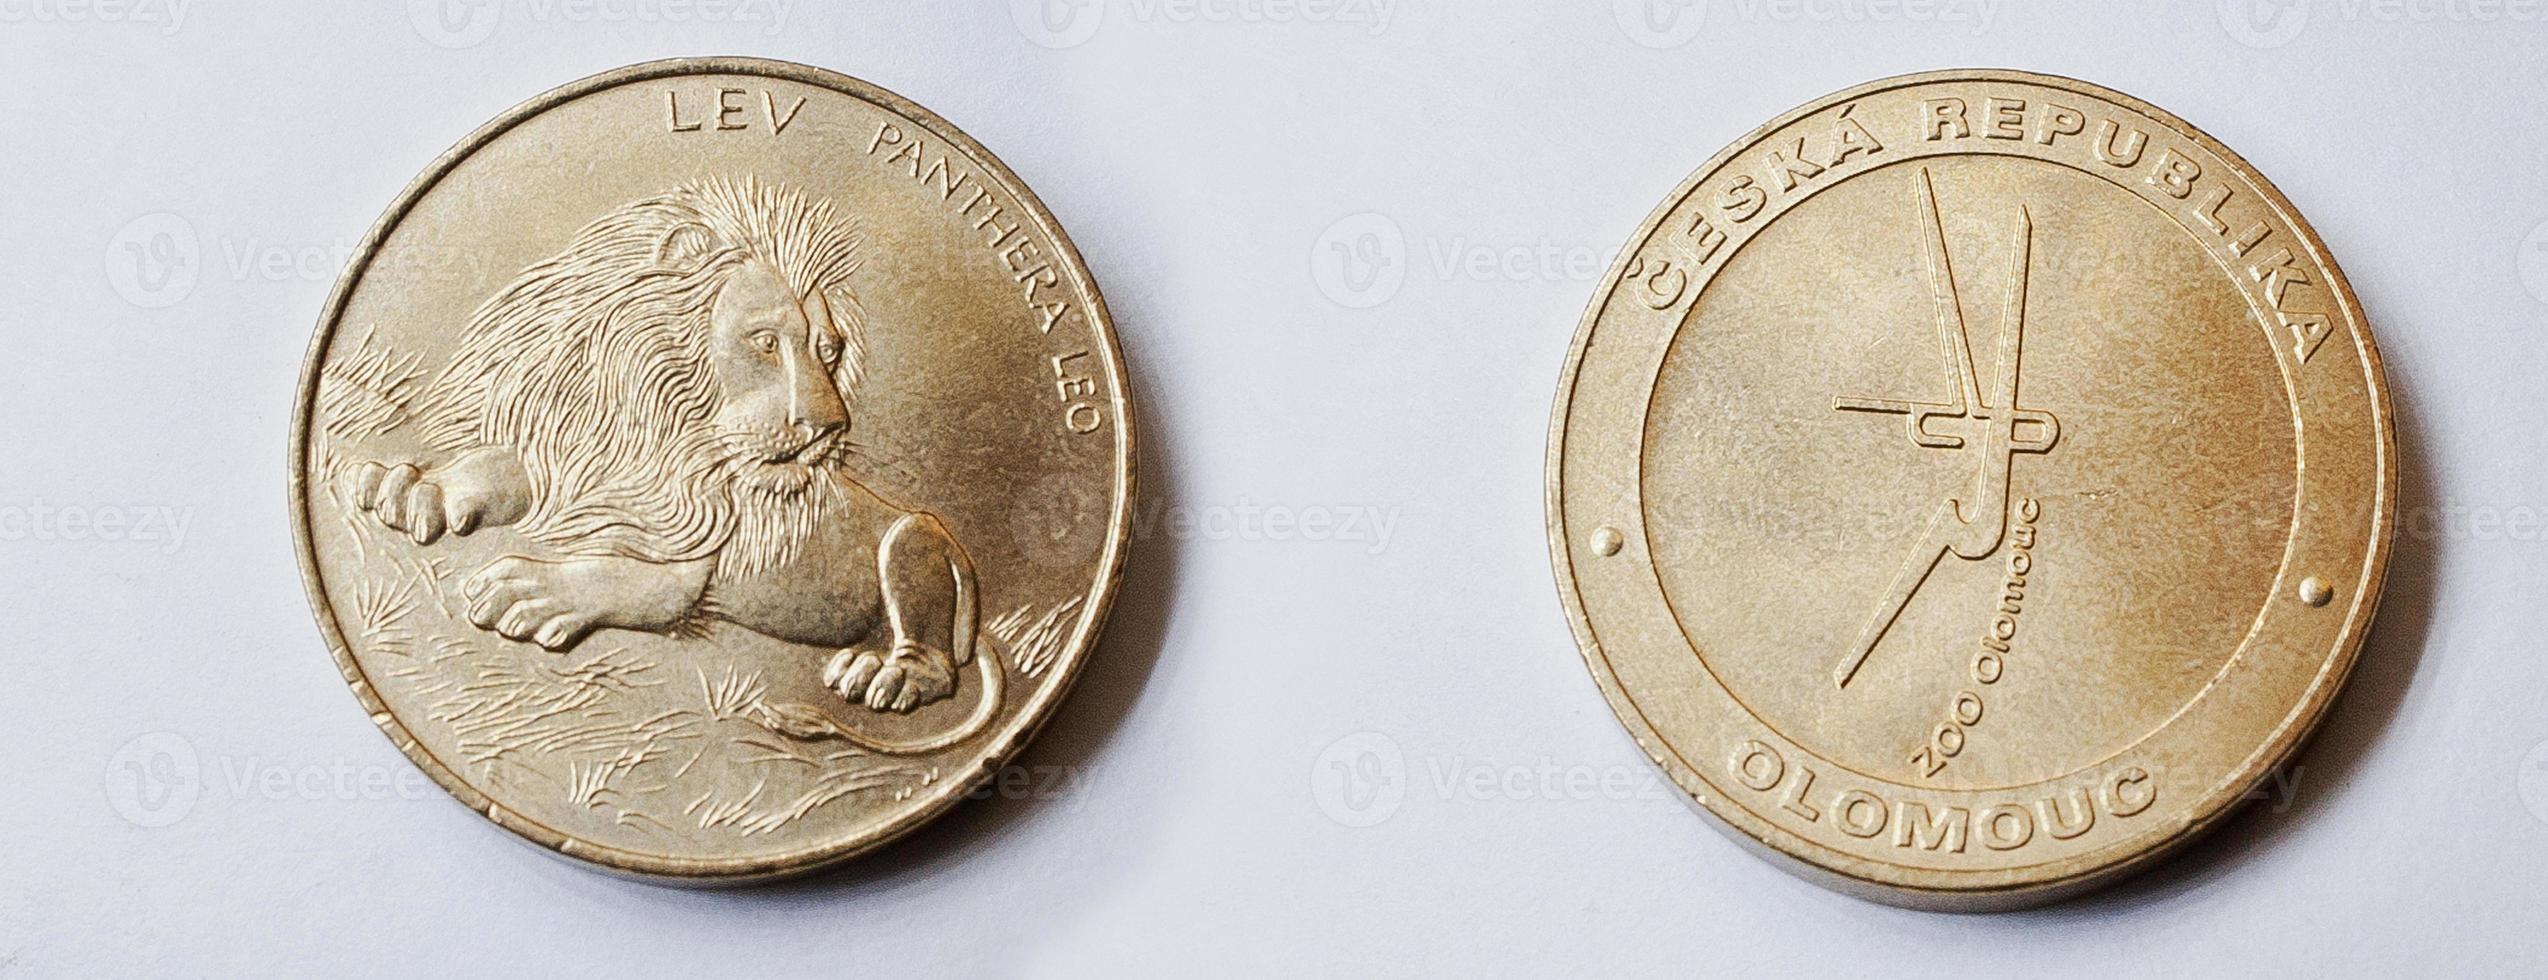 Set of coin crown  Czech Republic shows lion from Olomouc Zoo photo